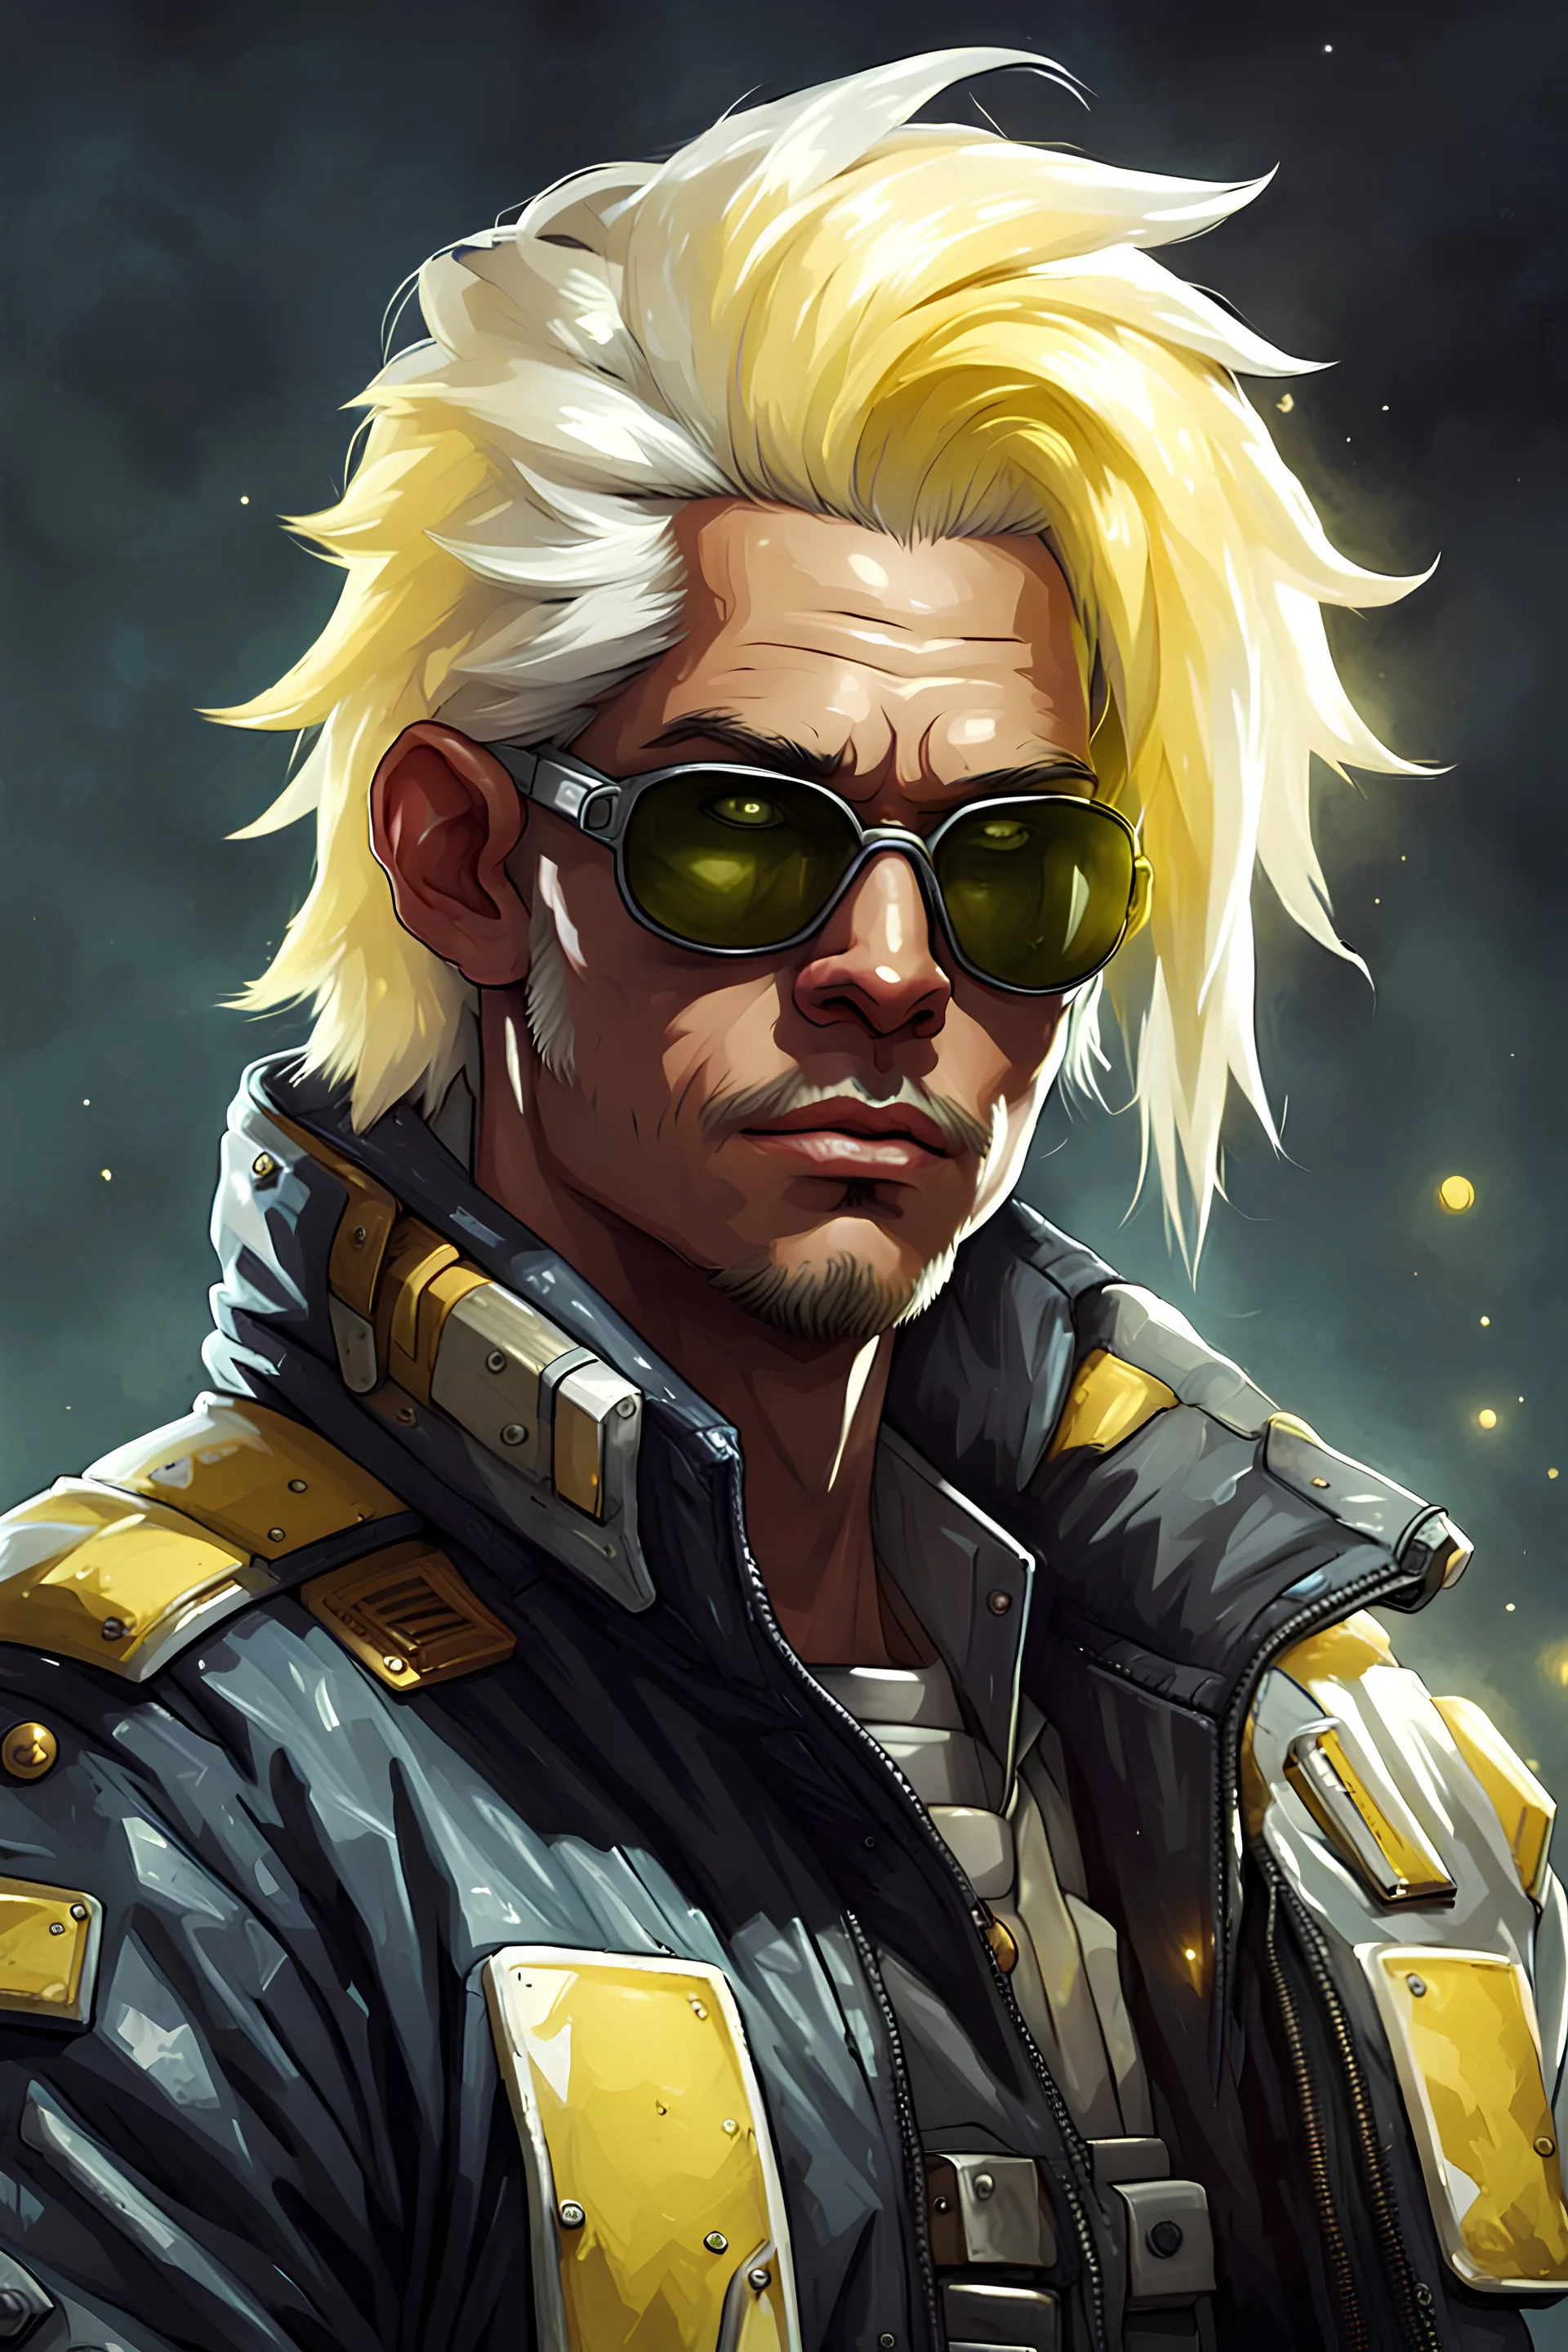 High Quality Science Fiction Character Portrait of an bounty hunter with White-Yellow Hair in a Bomber Jacket.